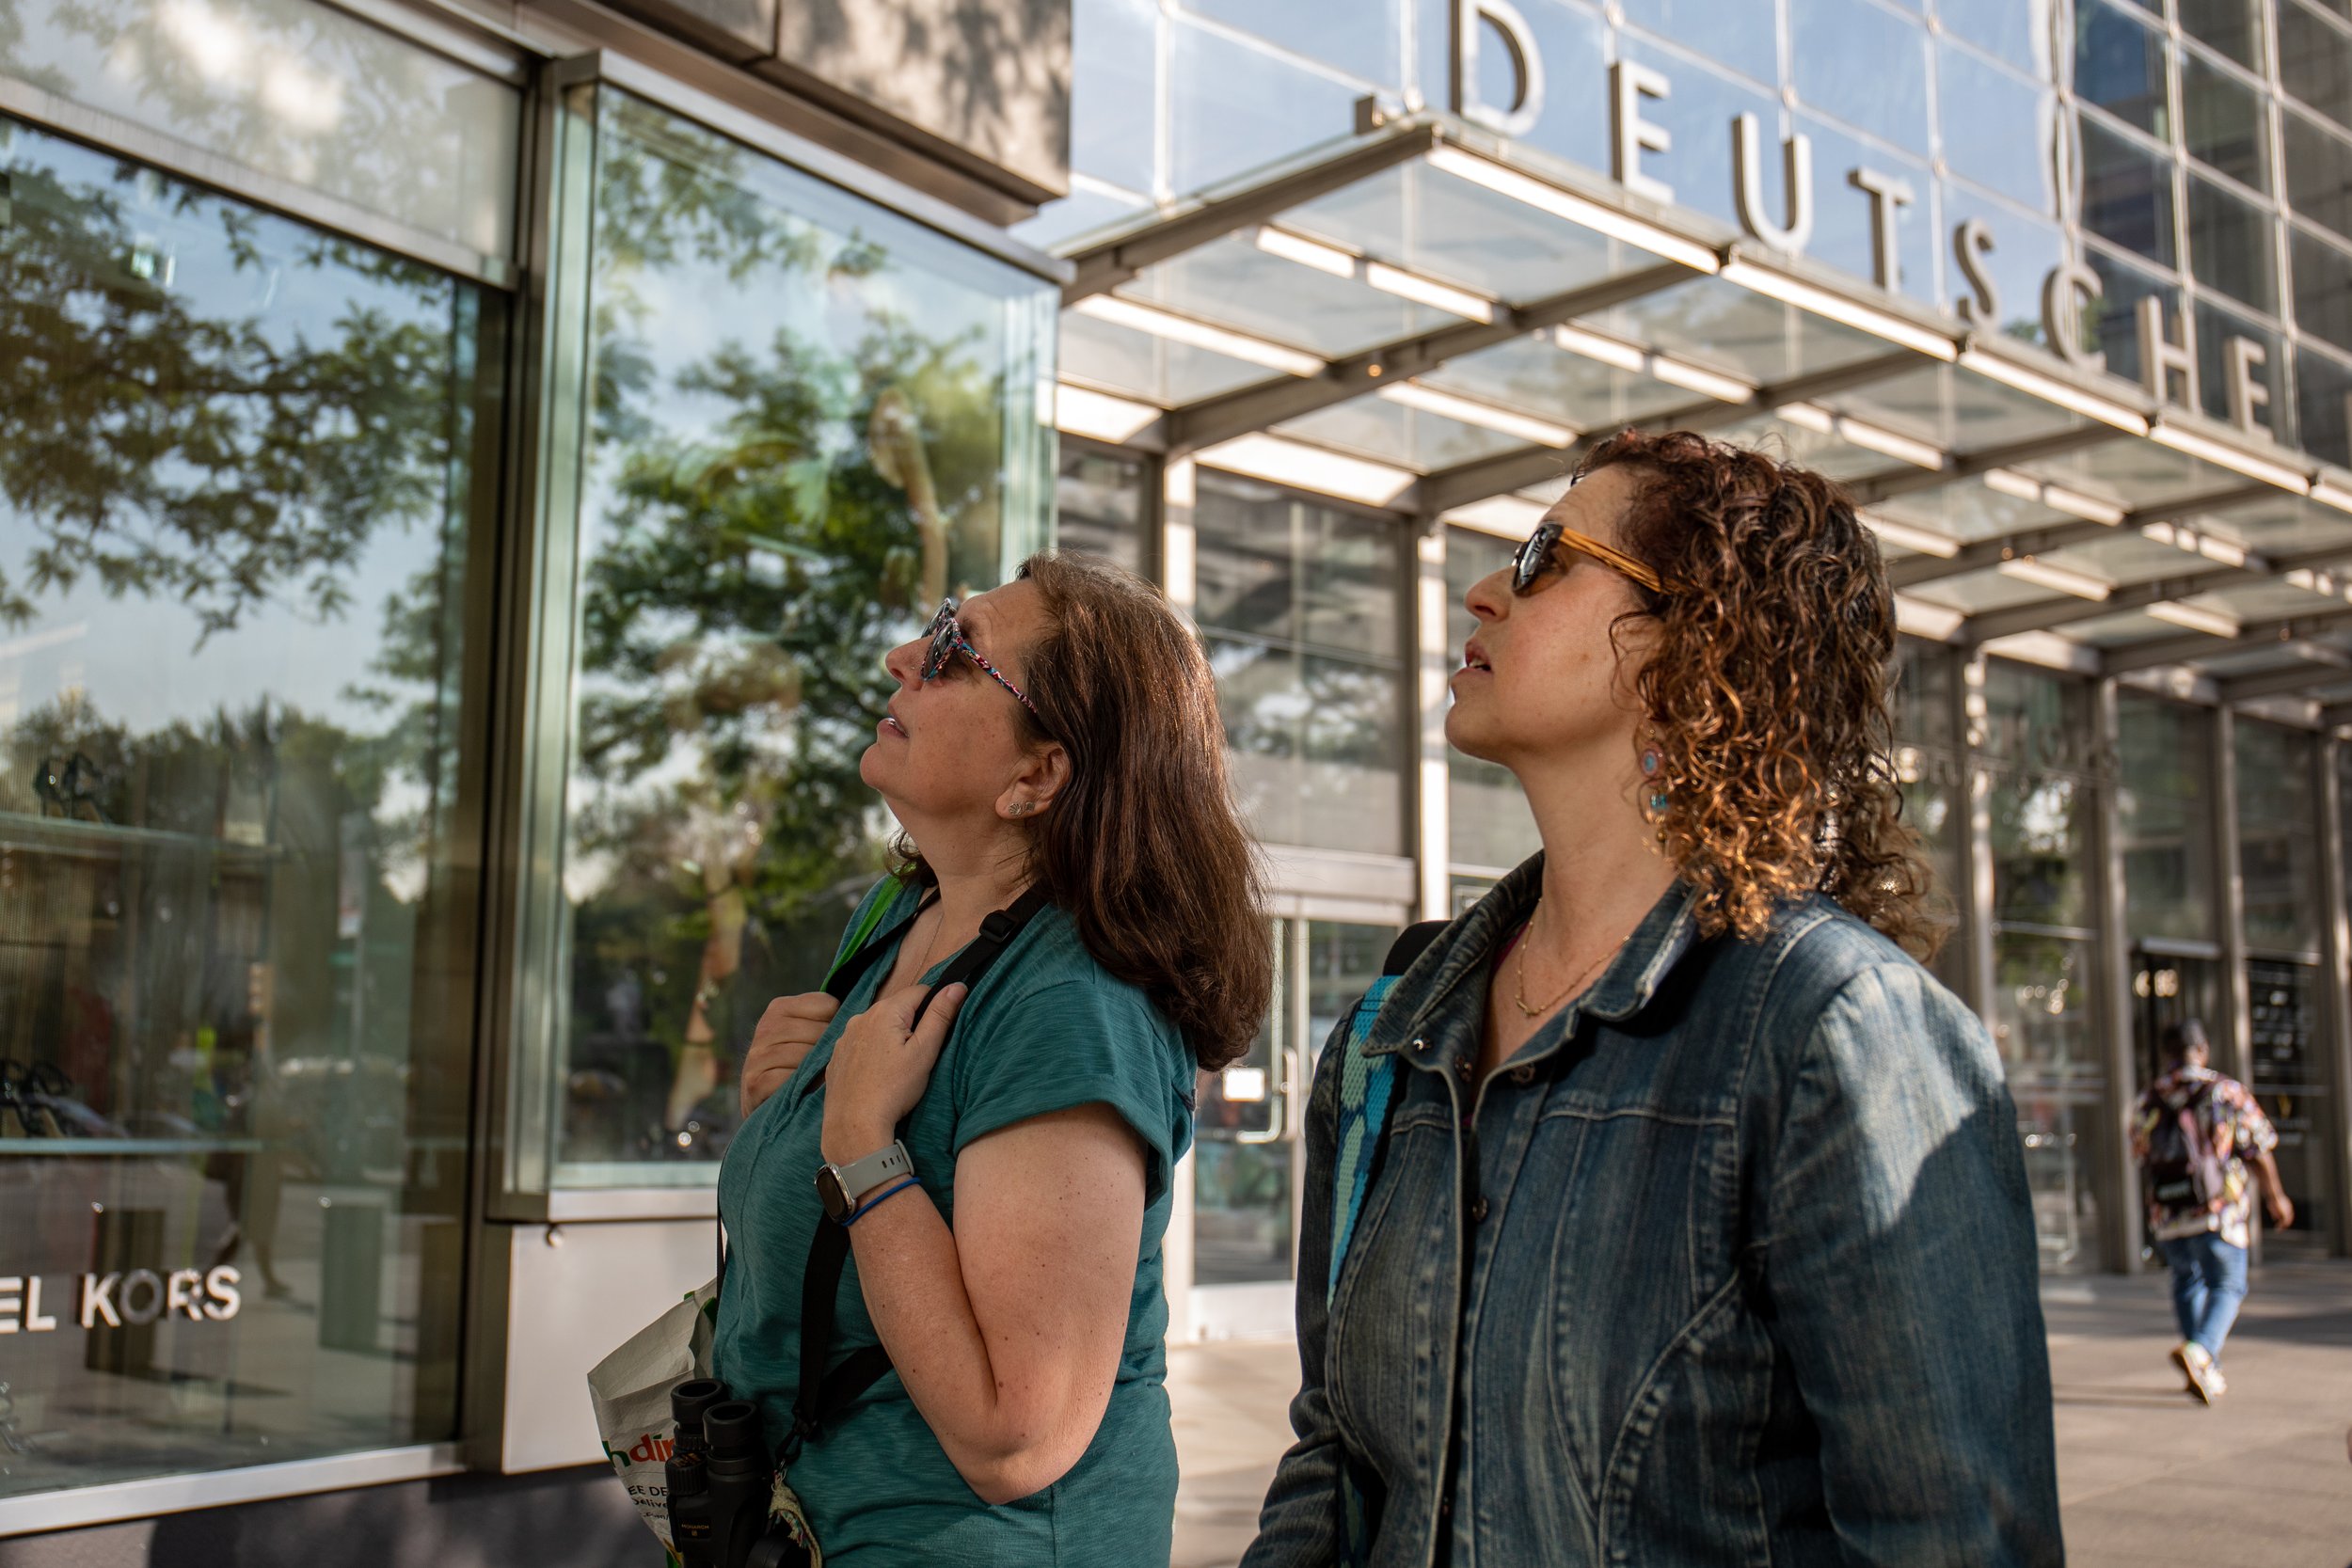  Winkler and Lincks walk around their Columbus Circle route to locate and report any injured or dead birds. They often look up to see if any birds have landed on awnings or other parts of buildings infrastructure.  